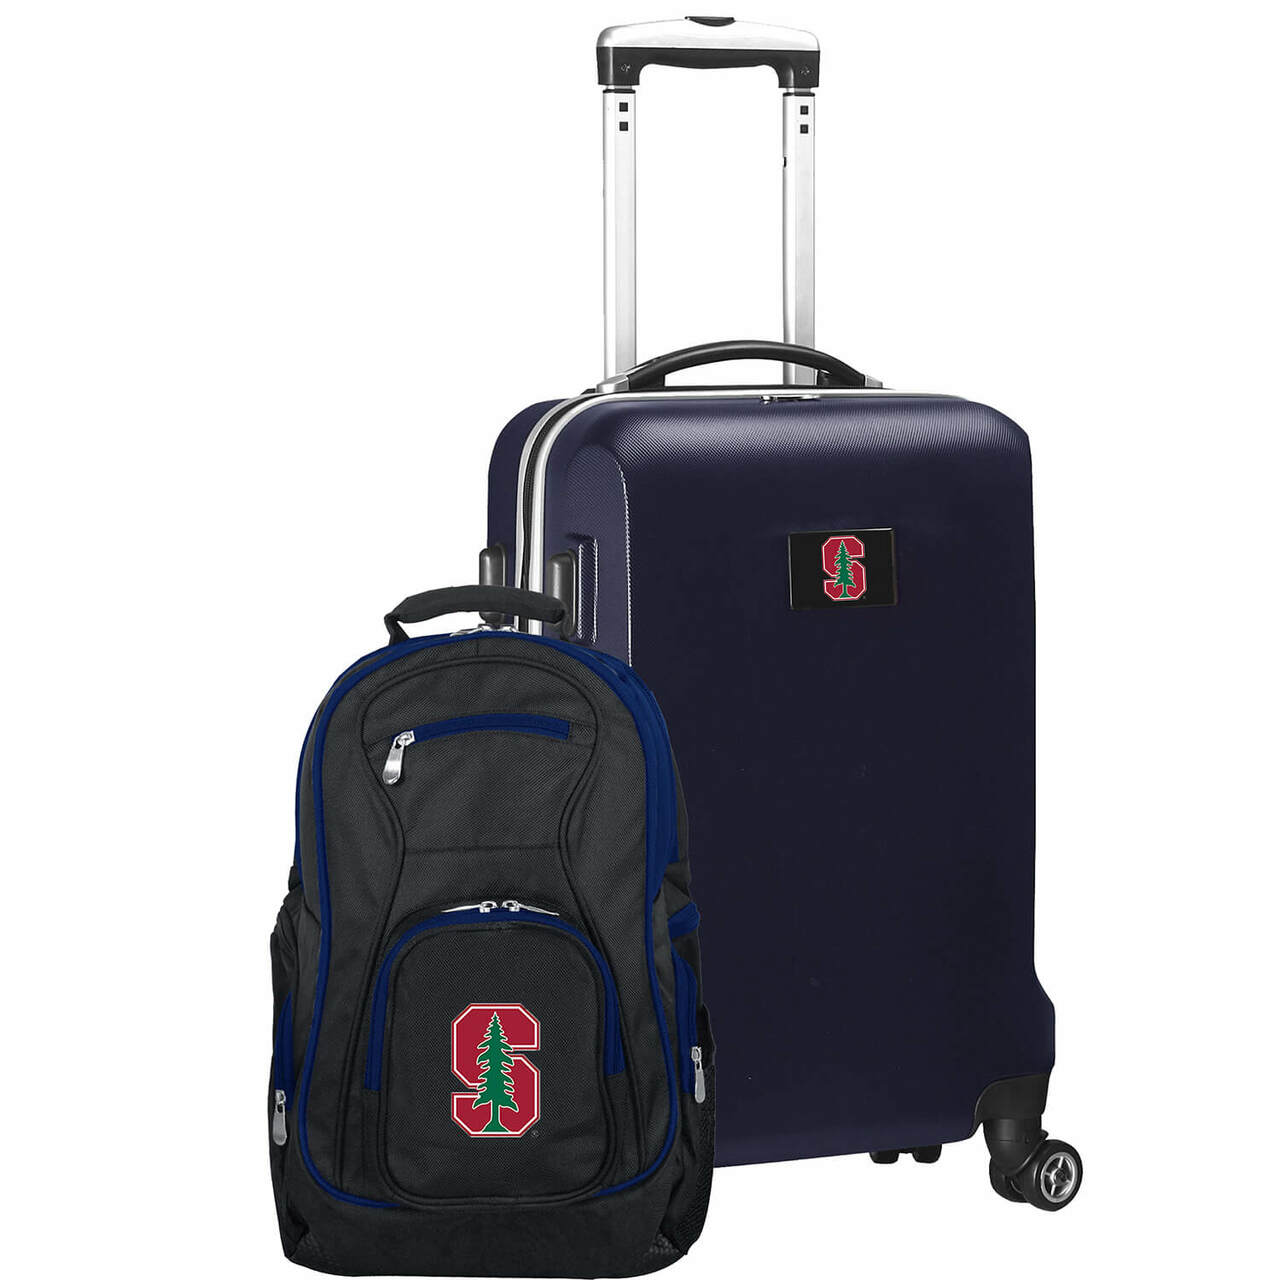 Stanford Cardinal Deluxe 2-Piece Backpack and Carry on Set in Navy